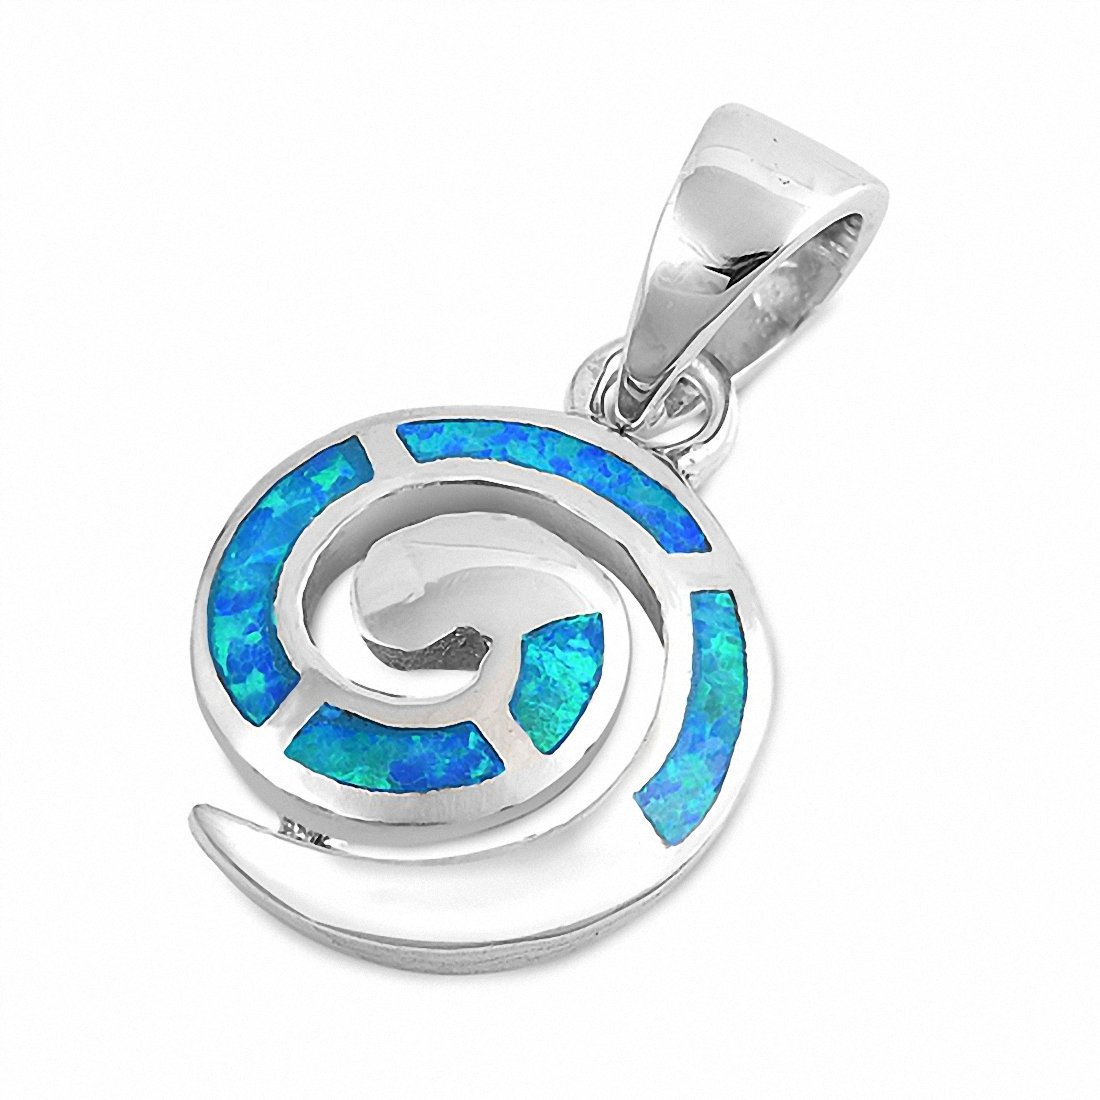 Swirl Spiral Pendant Charm Created Opal 925 Sterling Silver